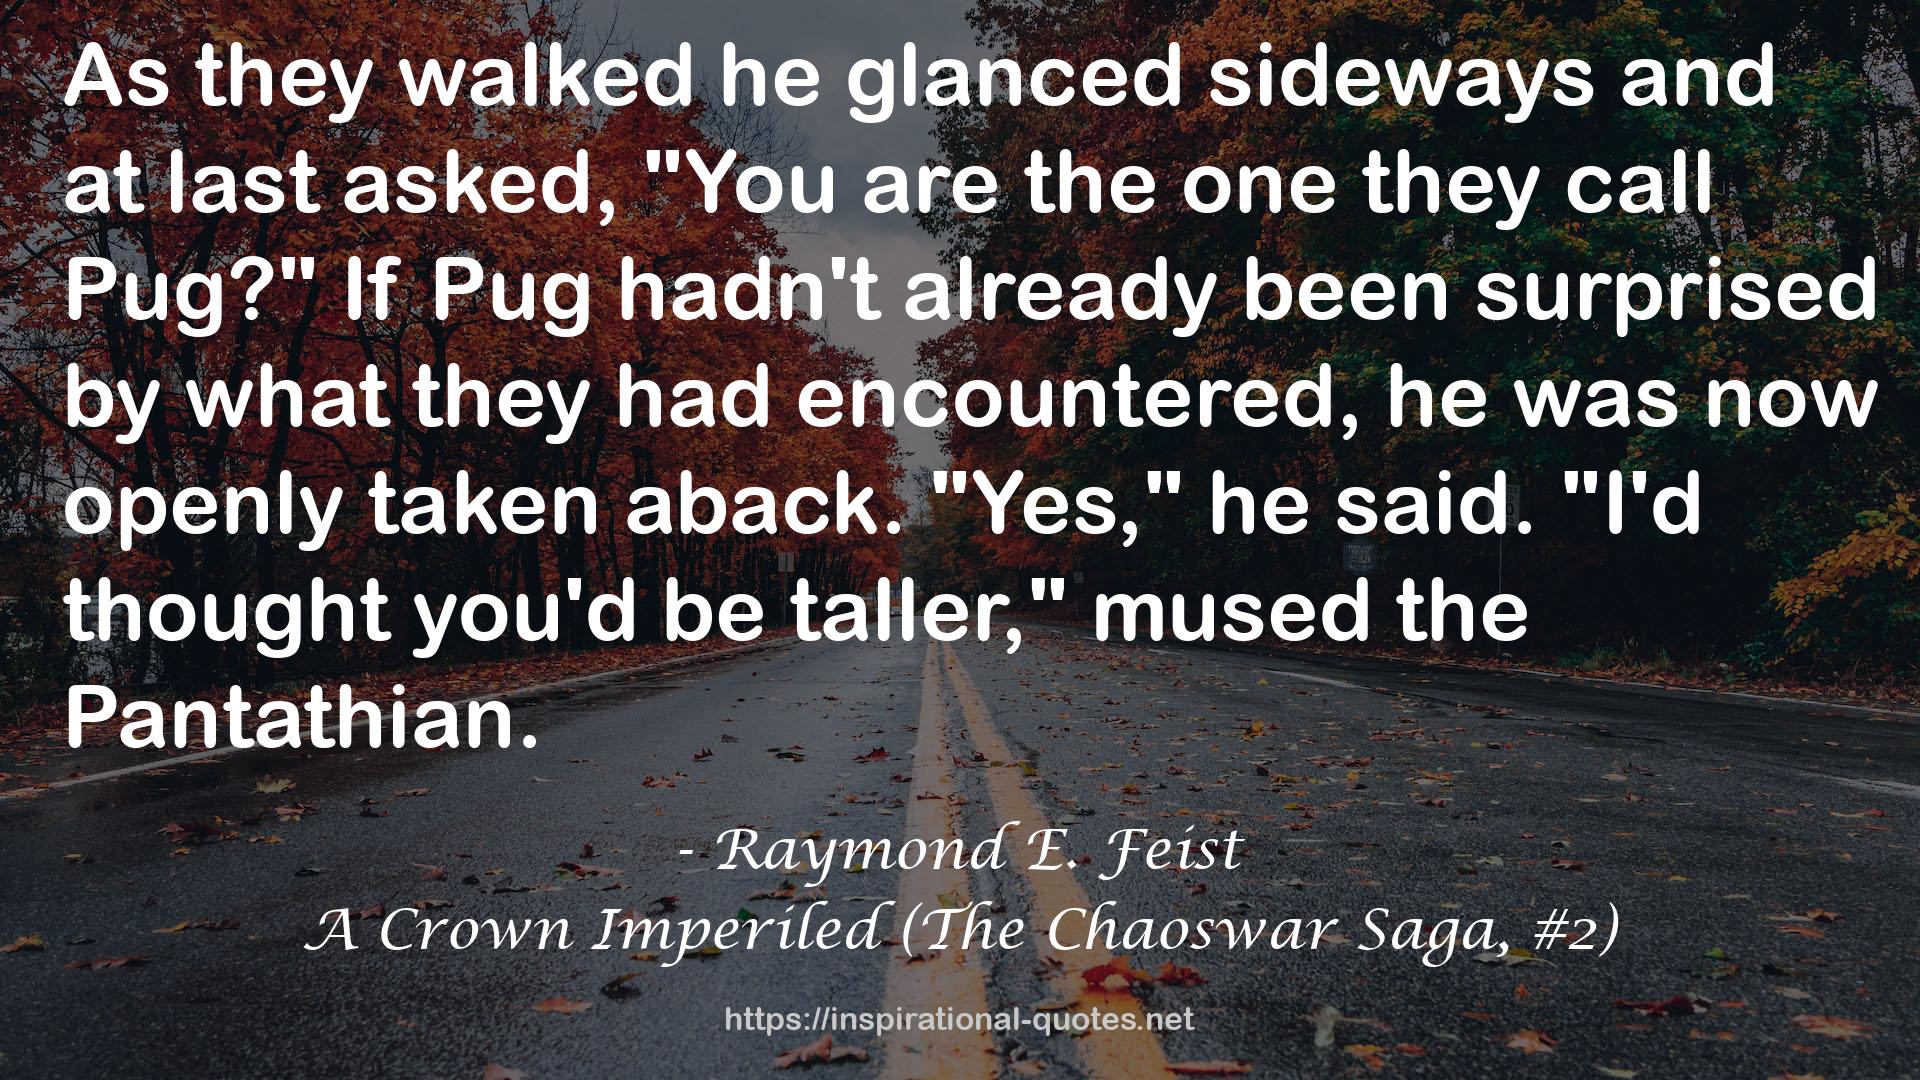 A Crown Imperiled (The Chaoswar Saga, #2) QUOTES